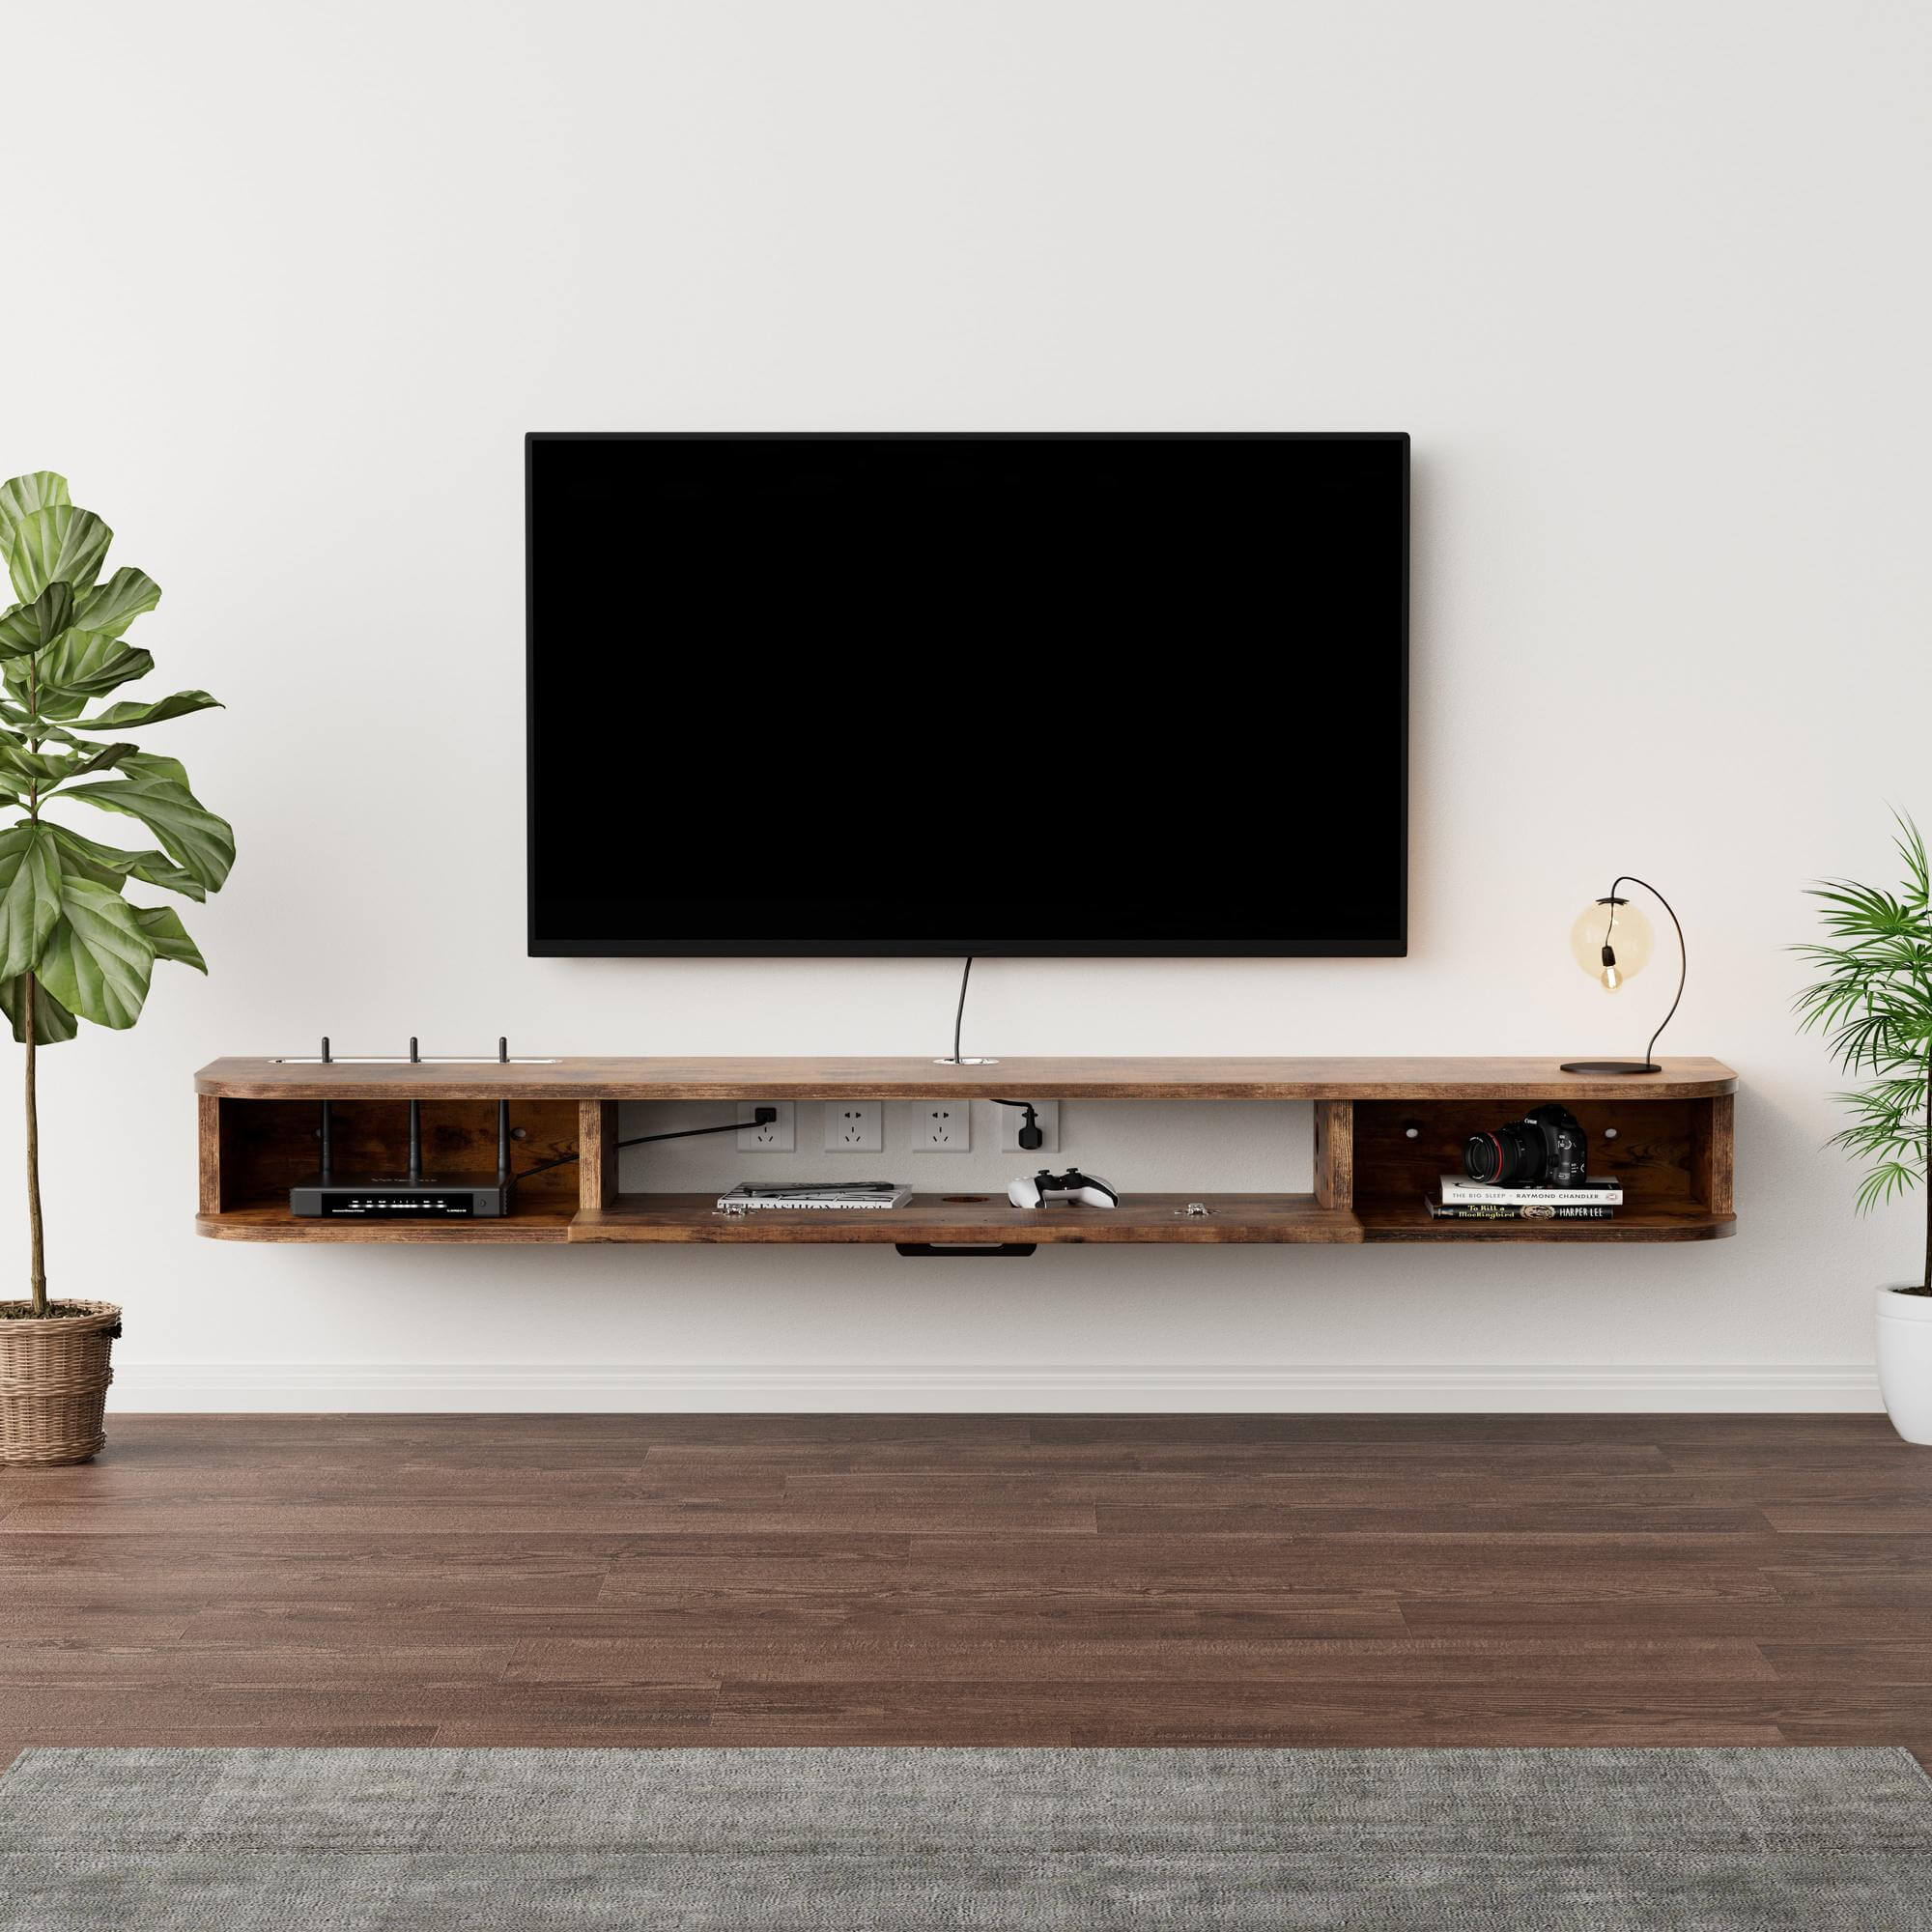 62.99" Rustic Brown Plywood Slim Floating TV Stand Media Console for 65" 70" TVs